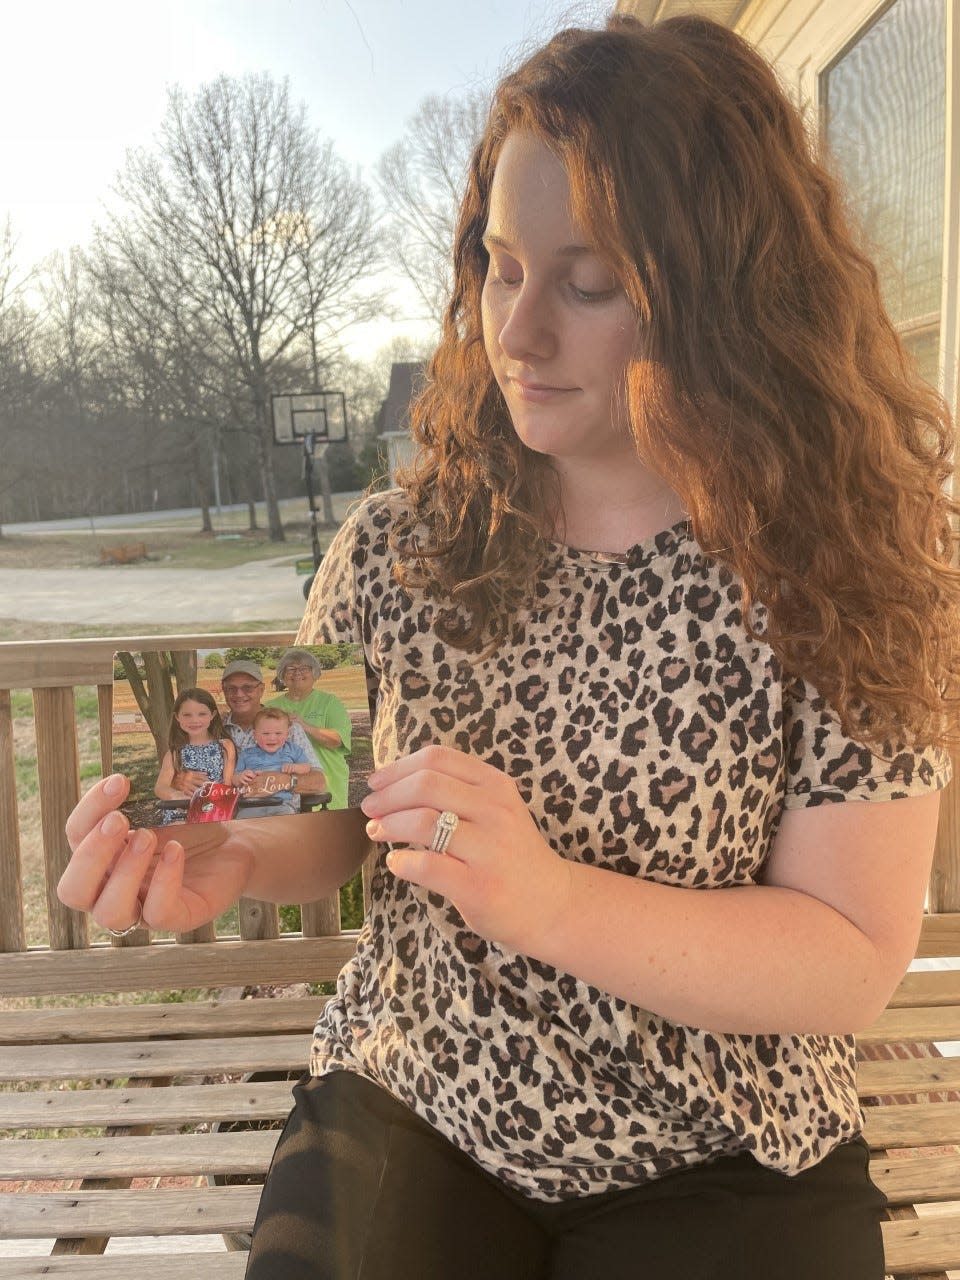 Shelby Crump holds a photo of her grandmother, Dot Hyde, who was killed in a hit and run in January.